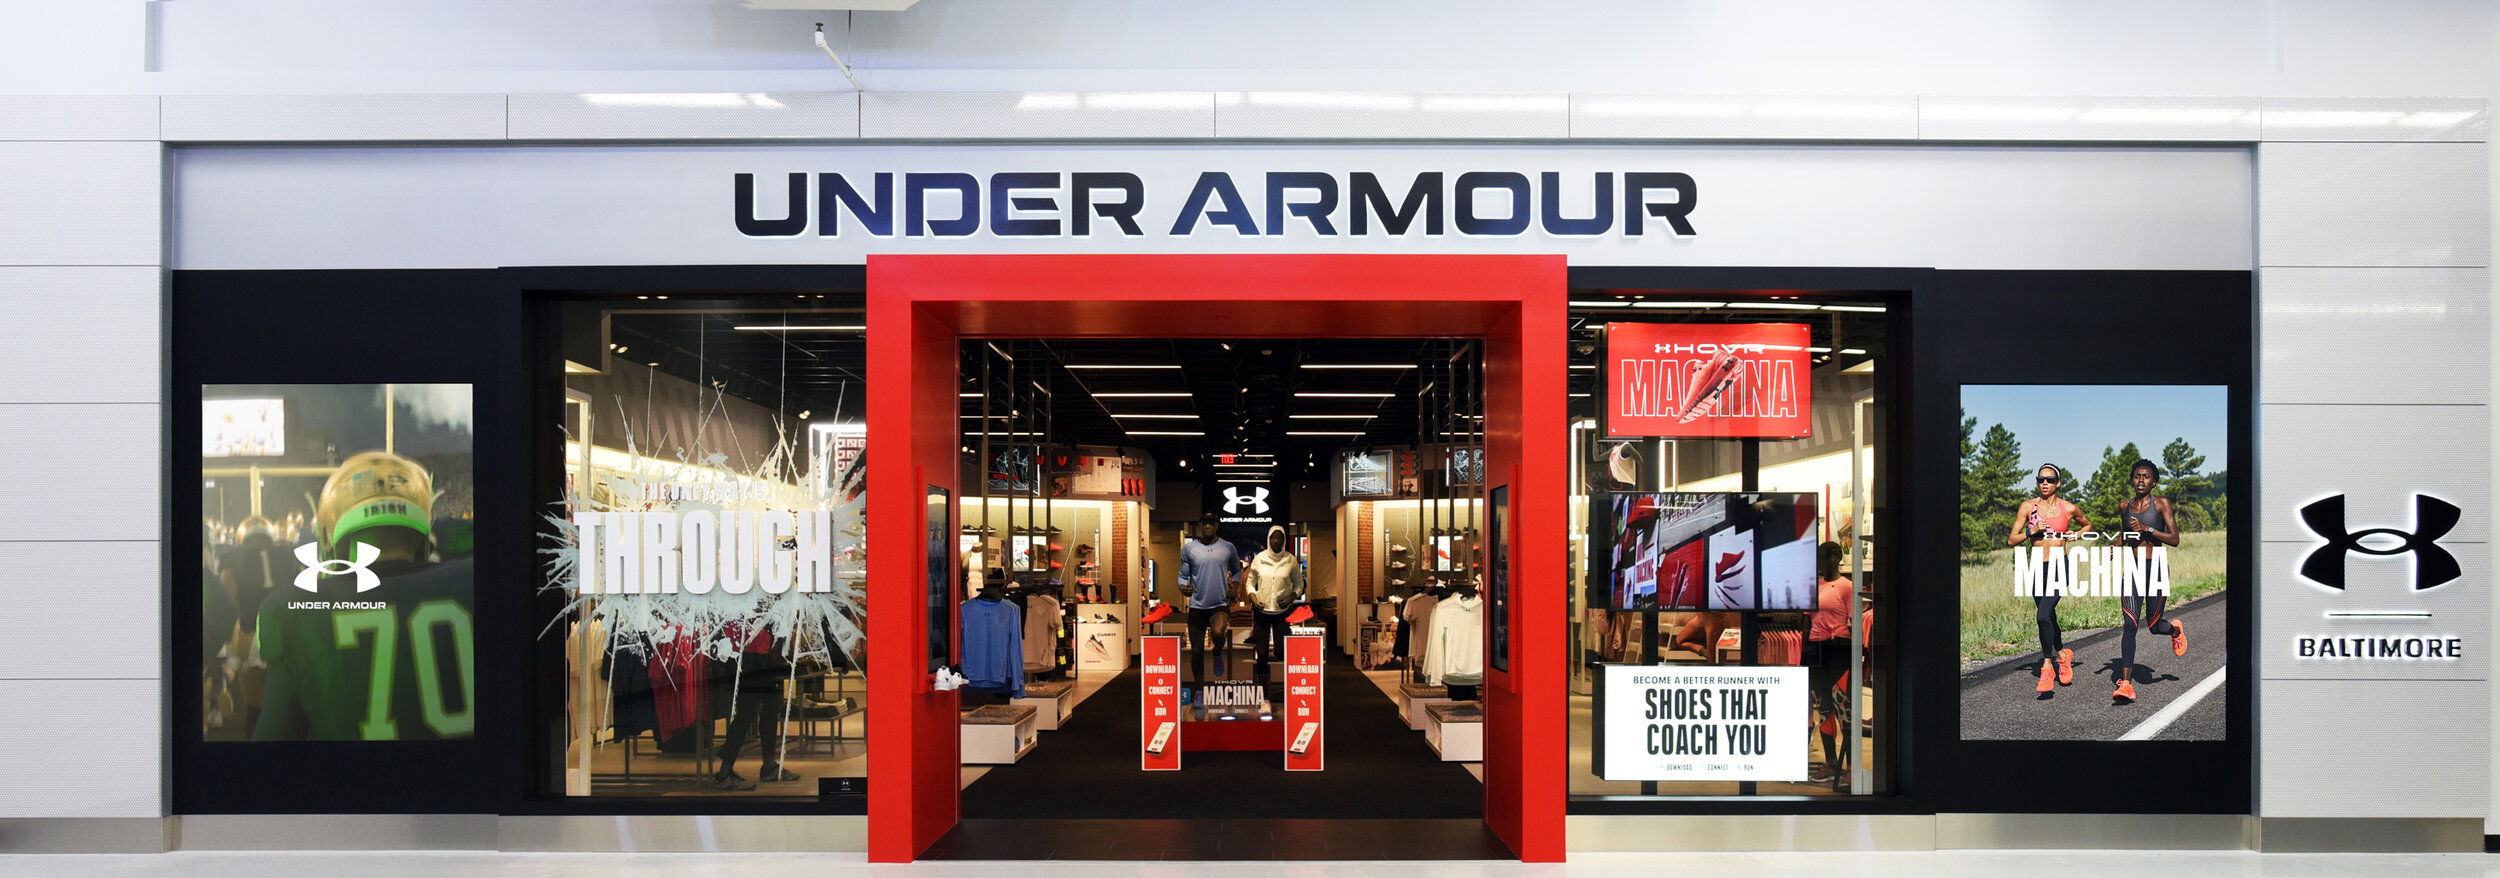 Under Armour, Brand House City Concept — Nathan Grundhauser